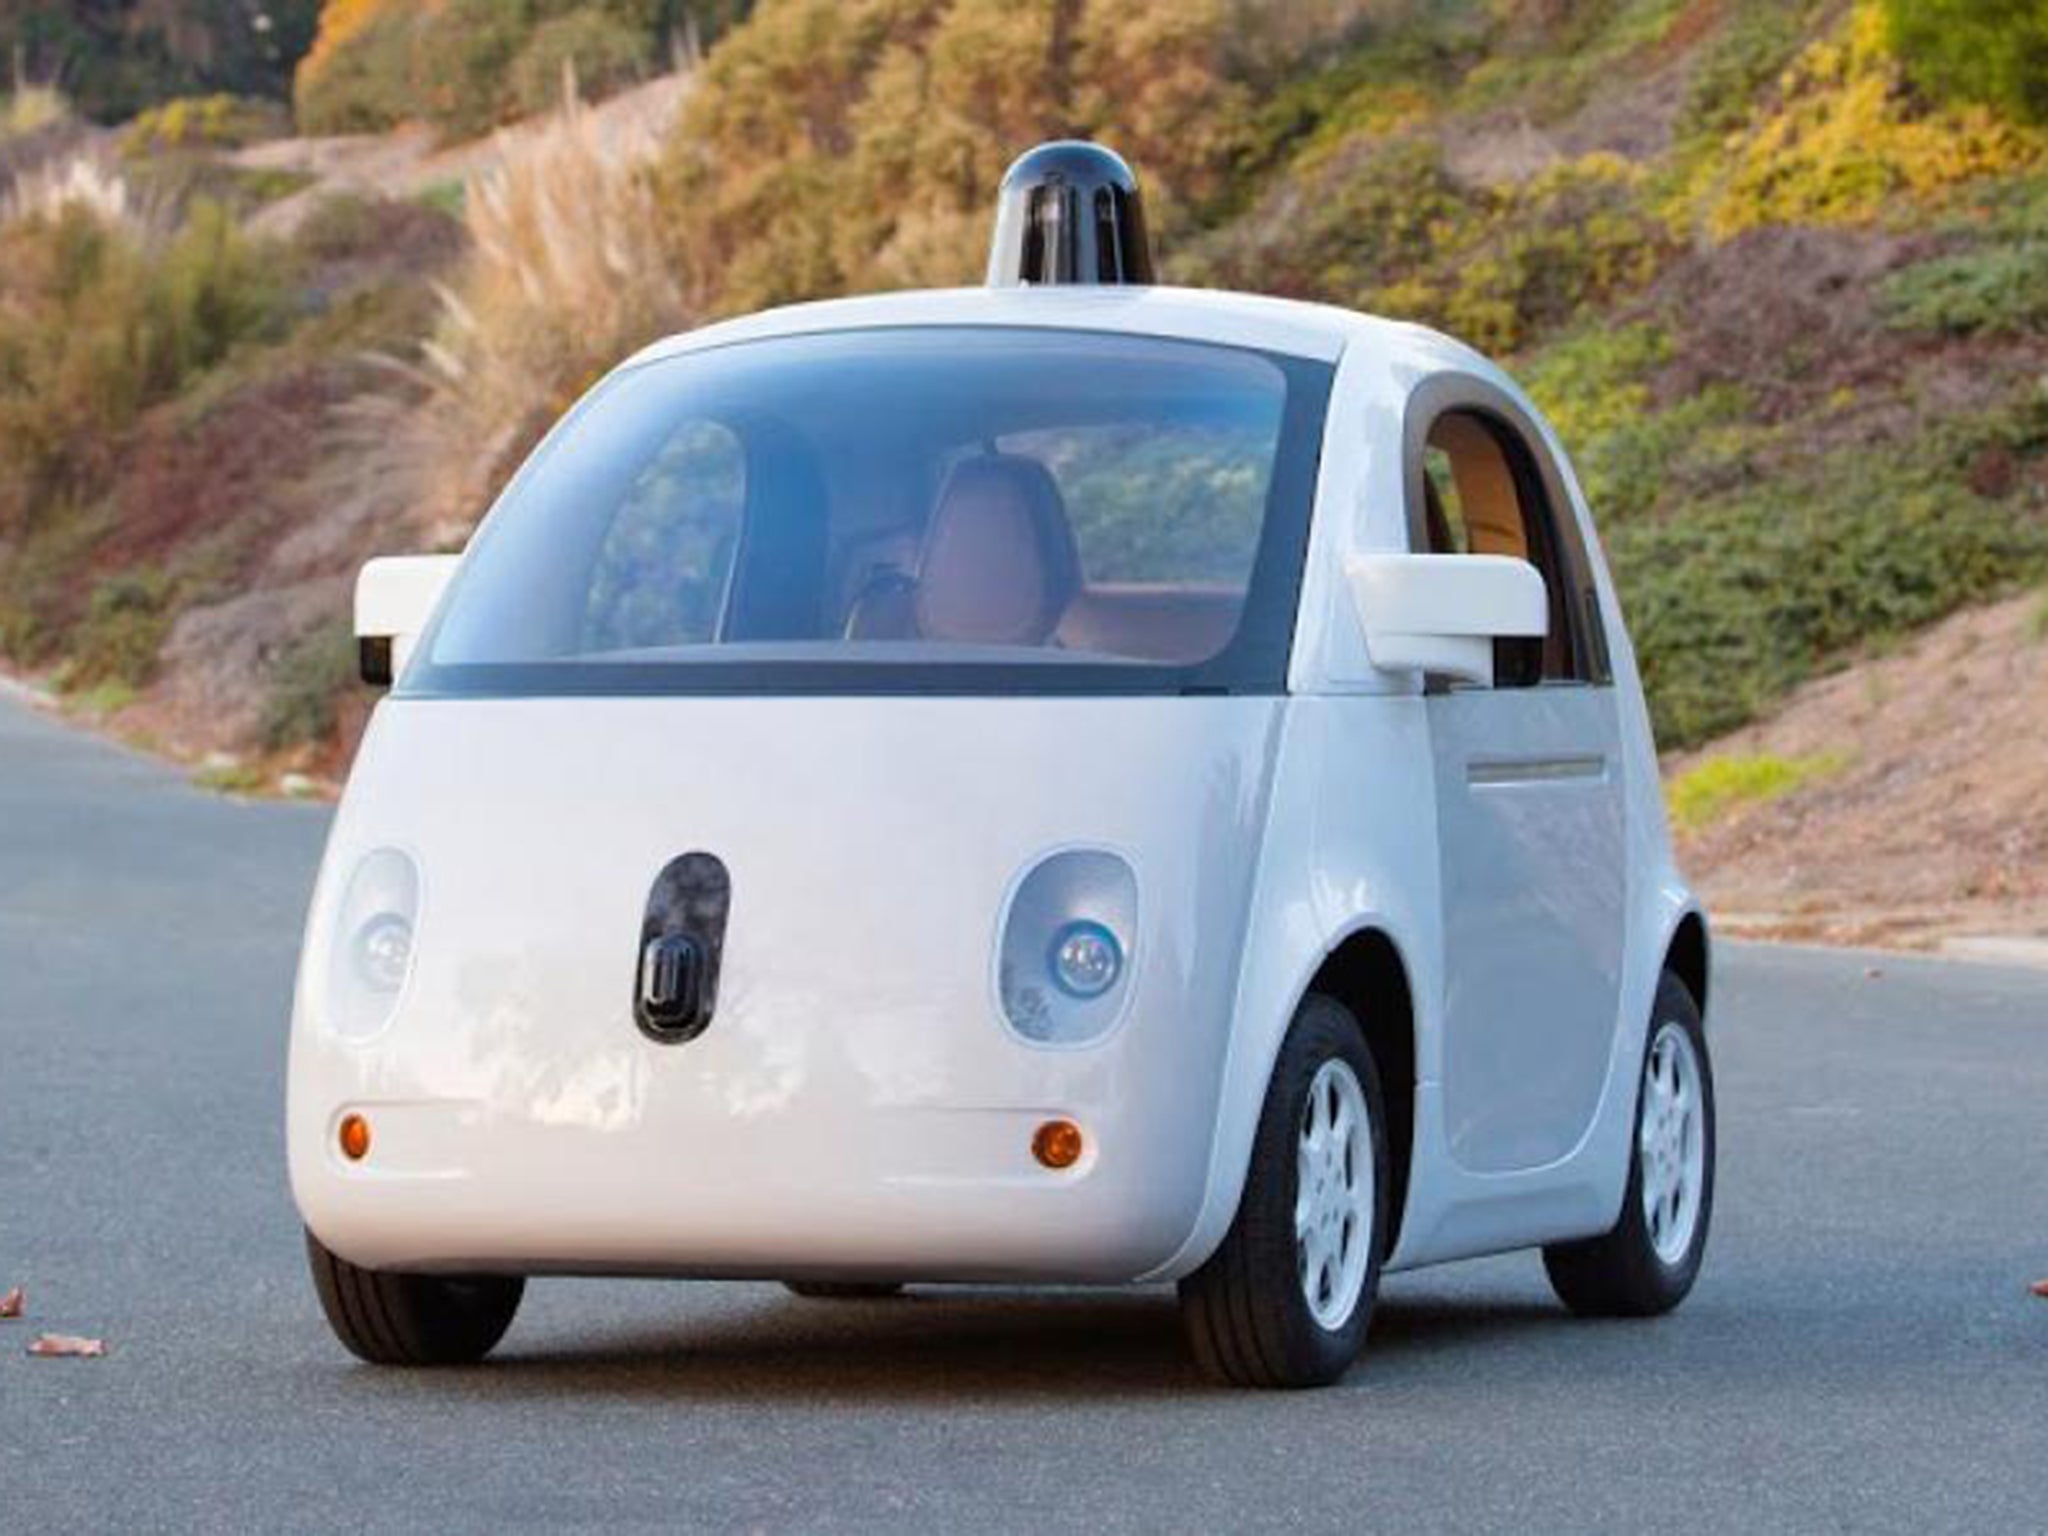 Google has admitted it was seeking partner businesses with which to manufacture vehicles